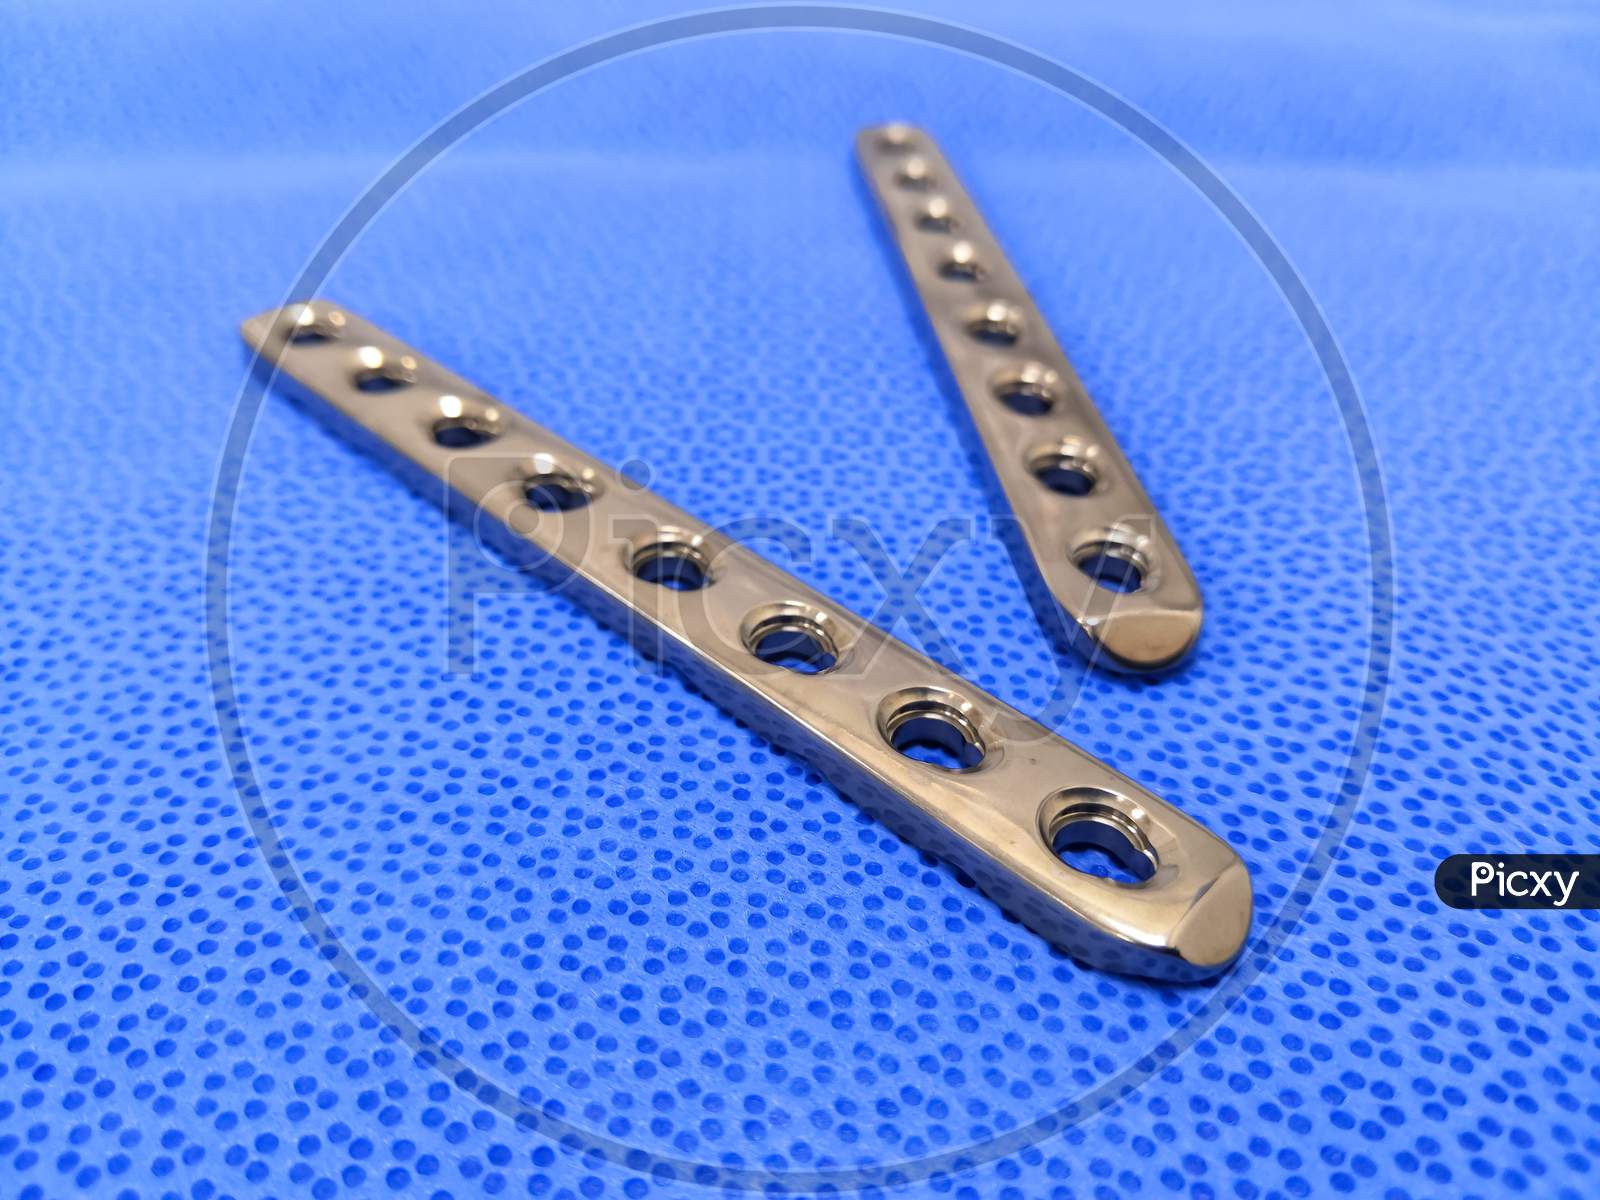 Orthopedic Implant Small Fragment Plate